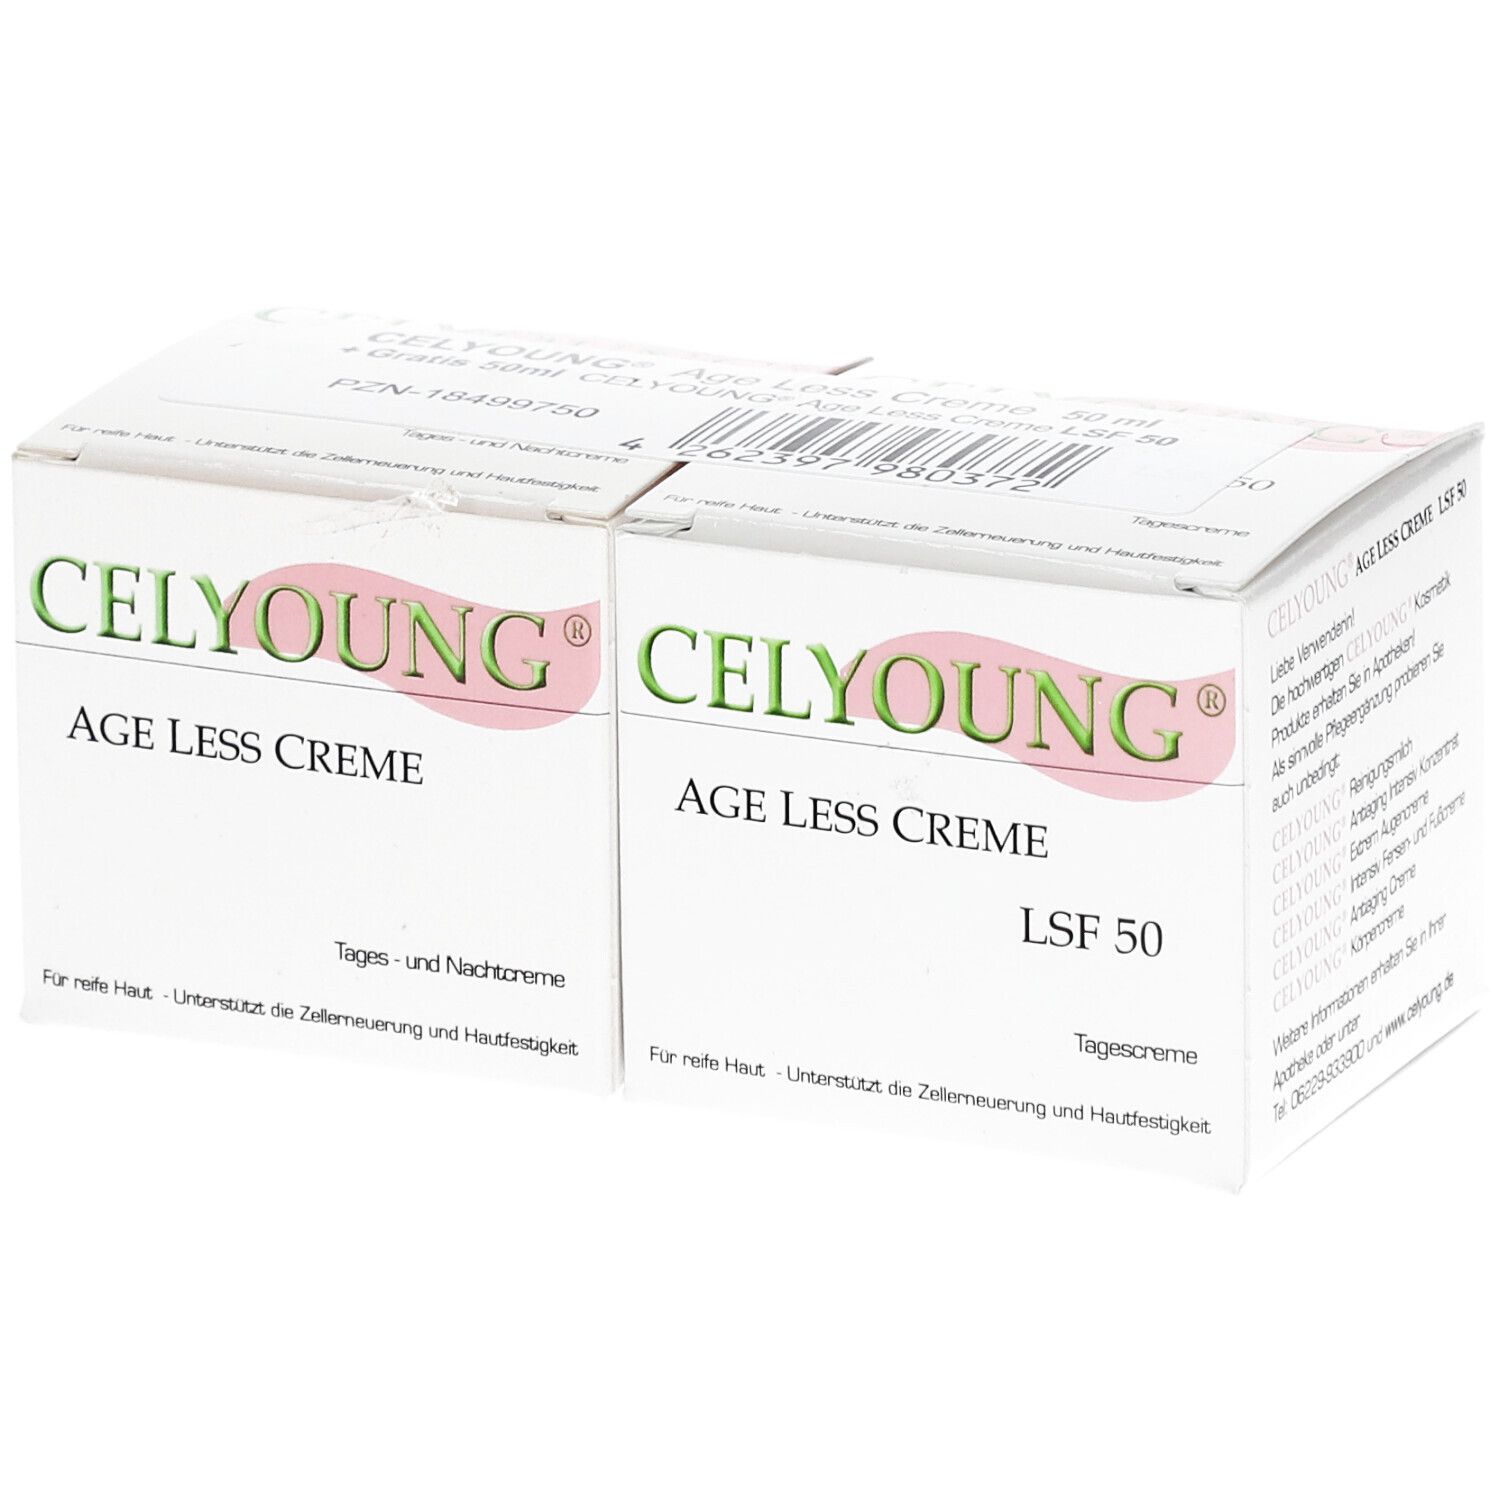 CELYOUNG Age less Creme + Agel less Creme LSF 50